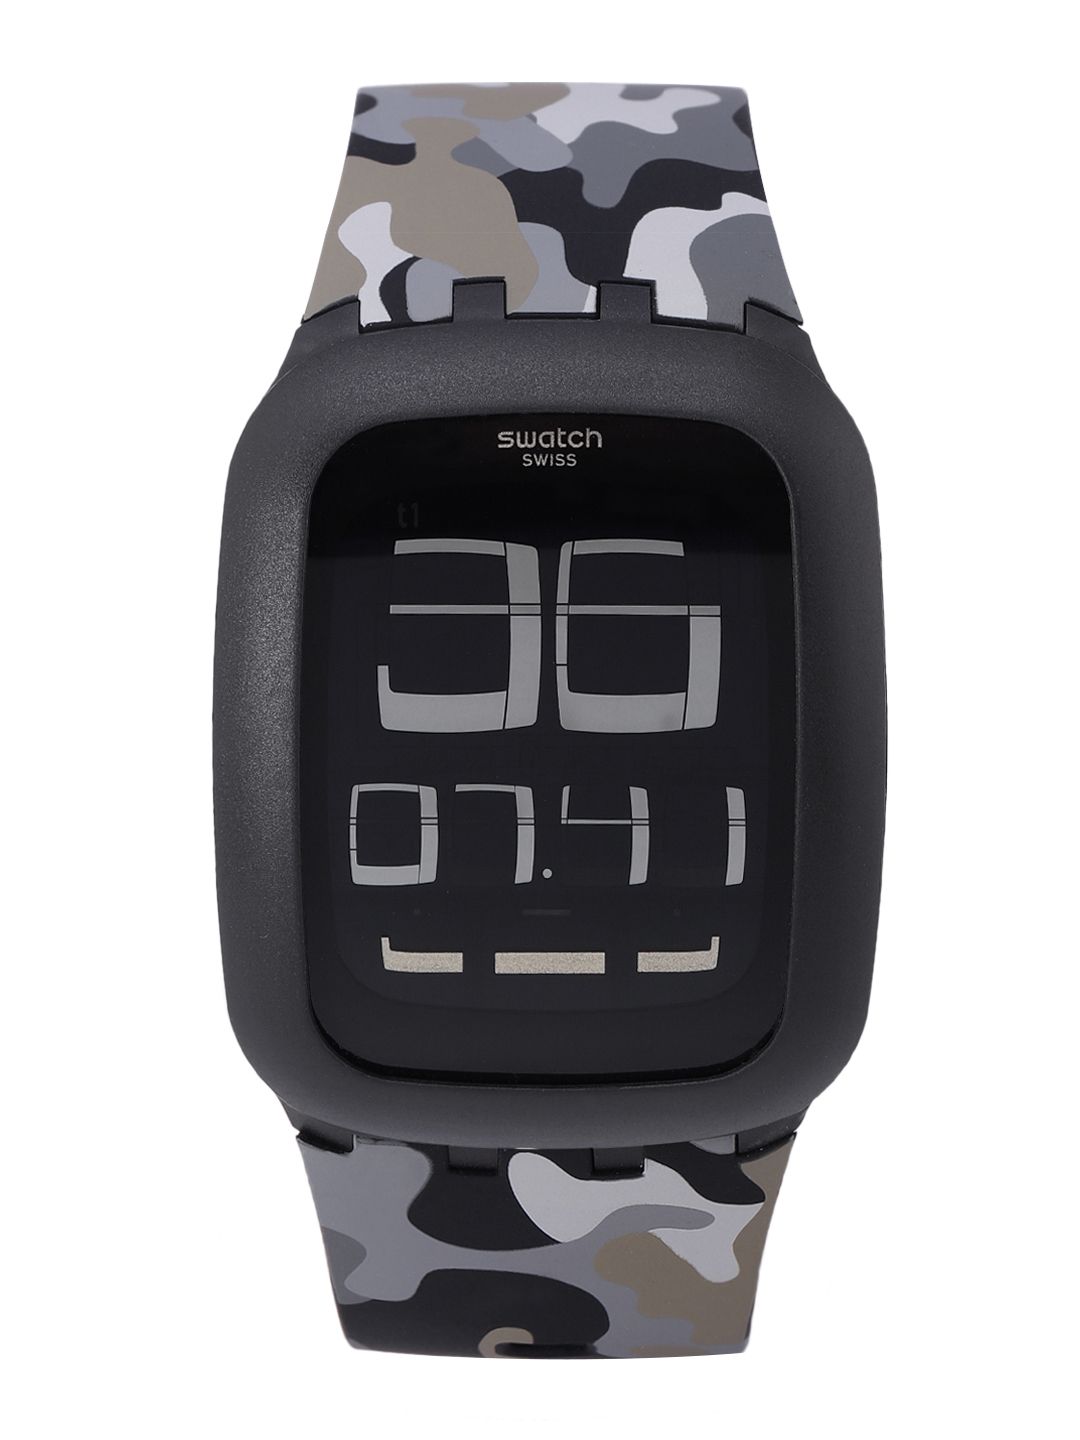 Swatch Touch Unisex Grey Water Resistant Digital watch SURB119C Price in India